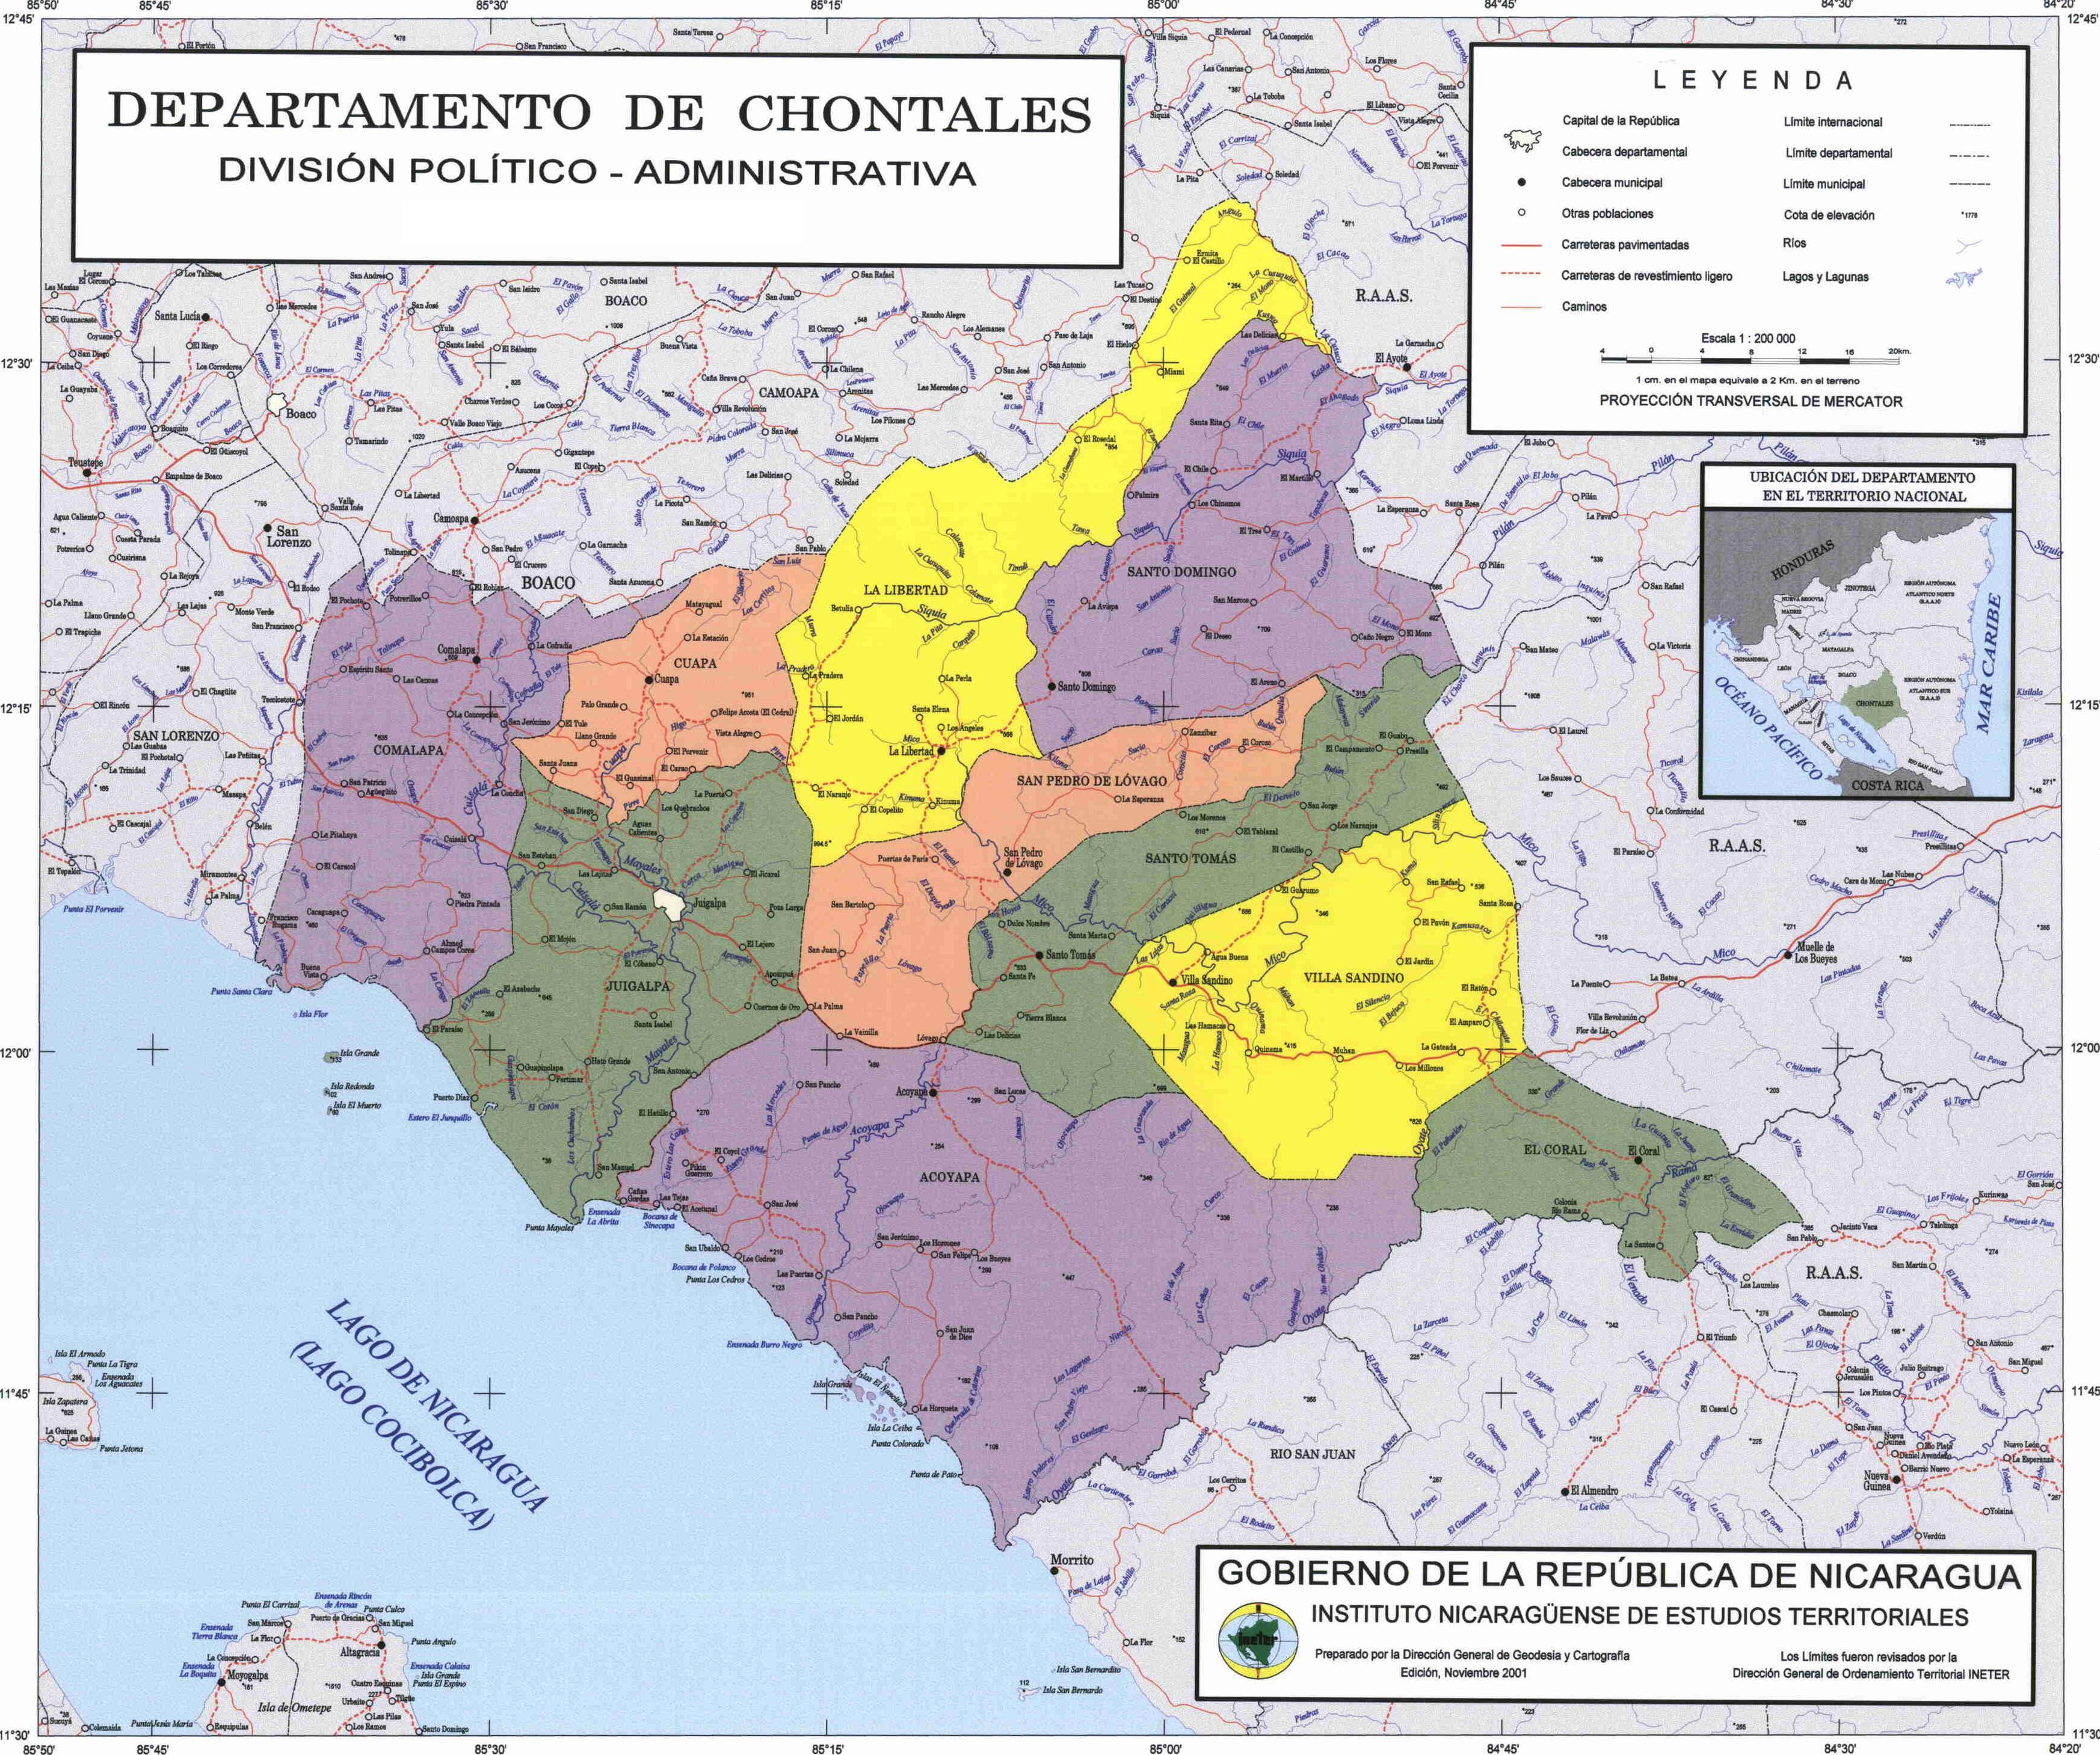 Chontales Department Administrative Political Map, Nicaragua